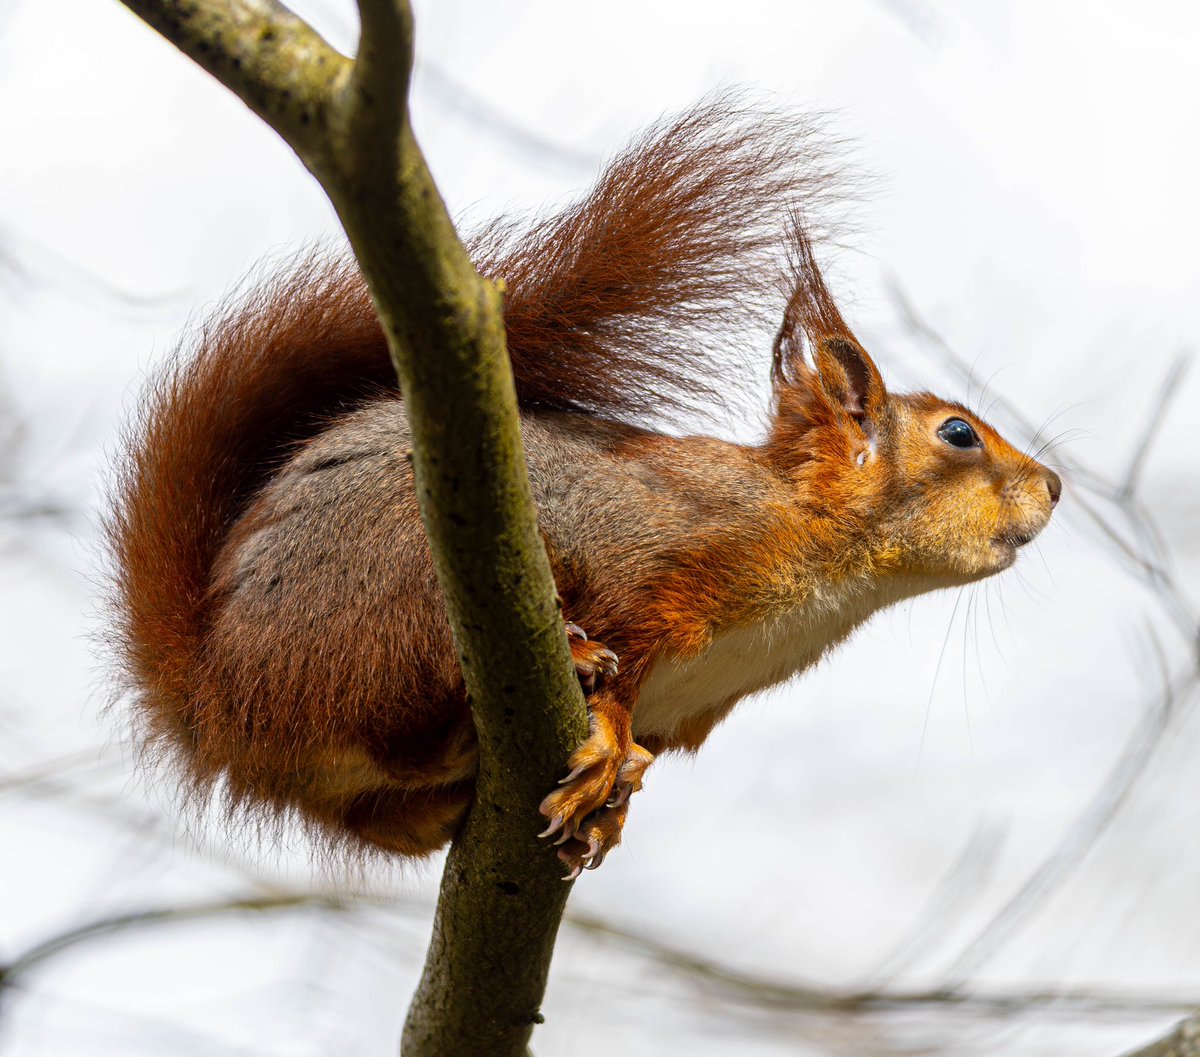 Sat amongst red squirrels at The Dingle on Anglesey